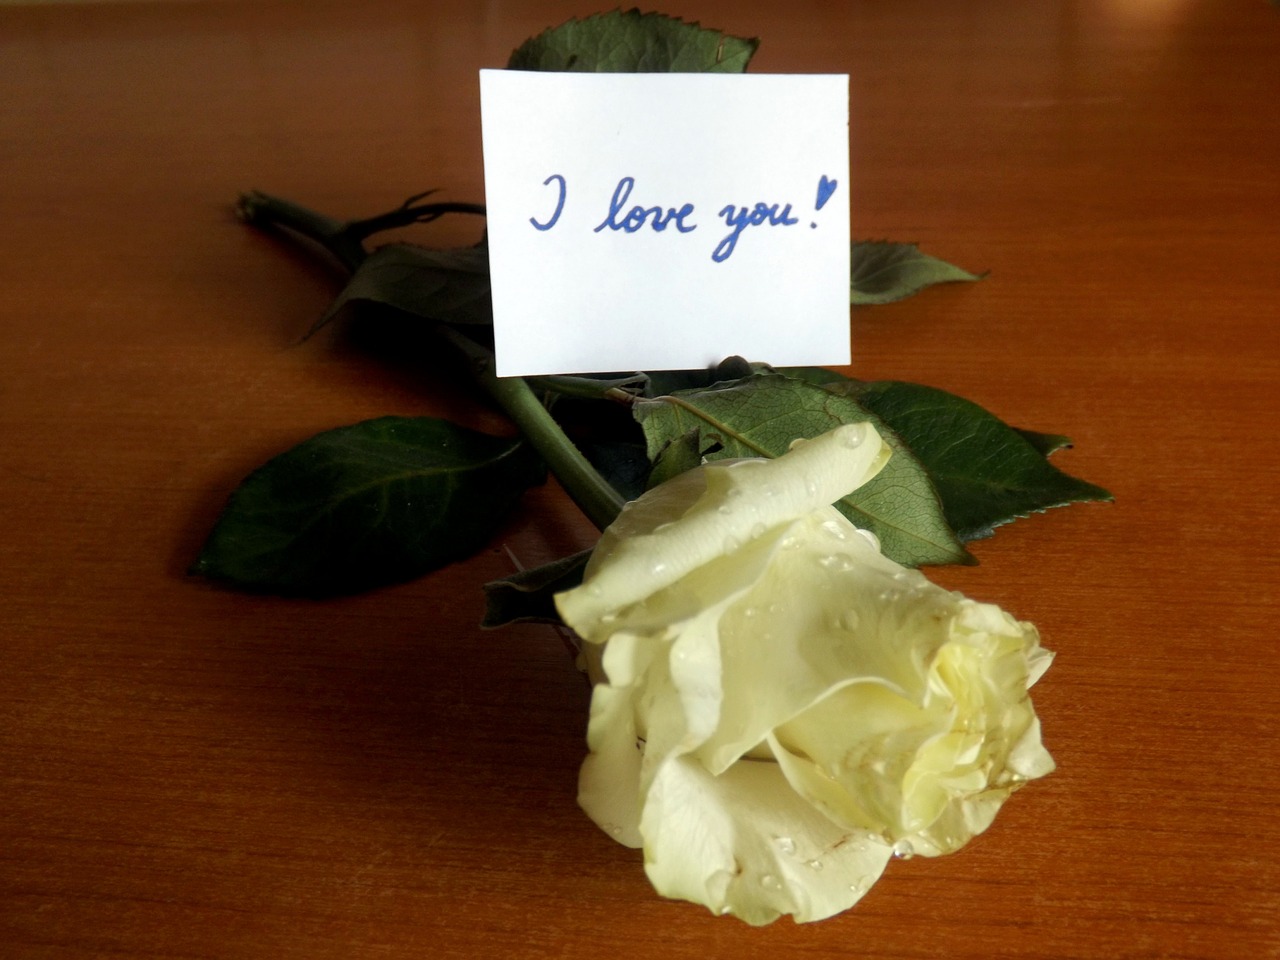 i love you rose message free photo